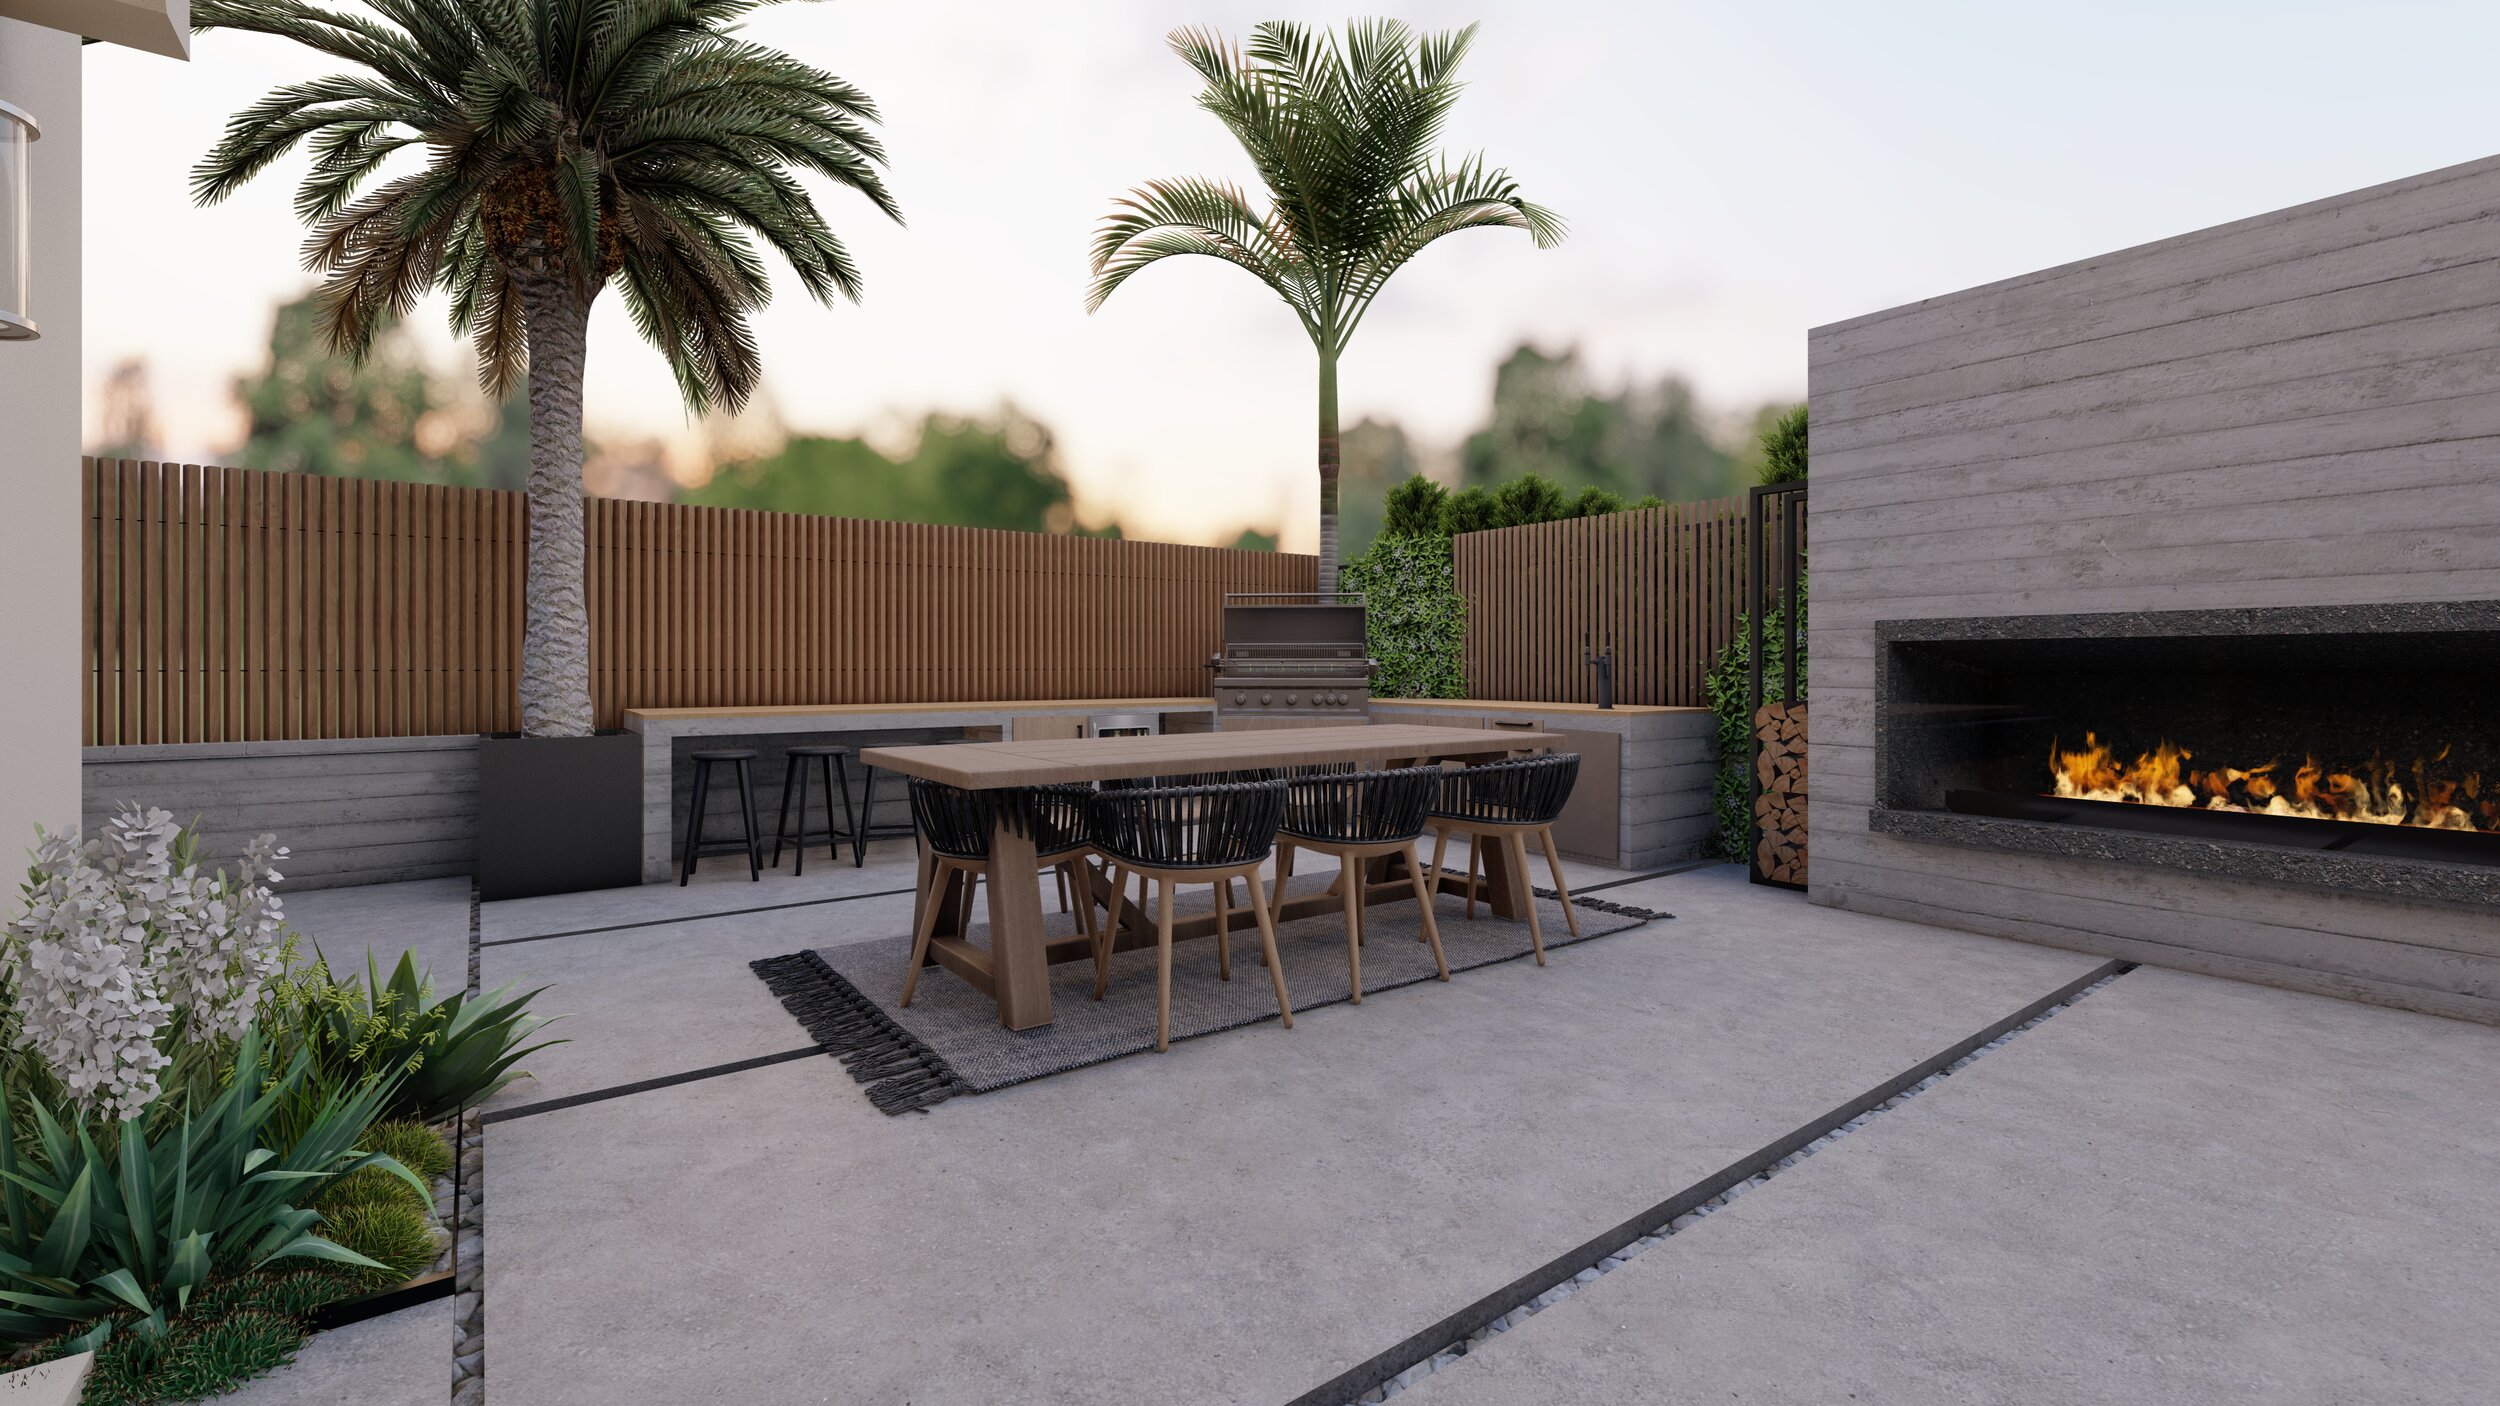 Large outdoor fireplace as the focal point of a backyard bbq and dining area